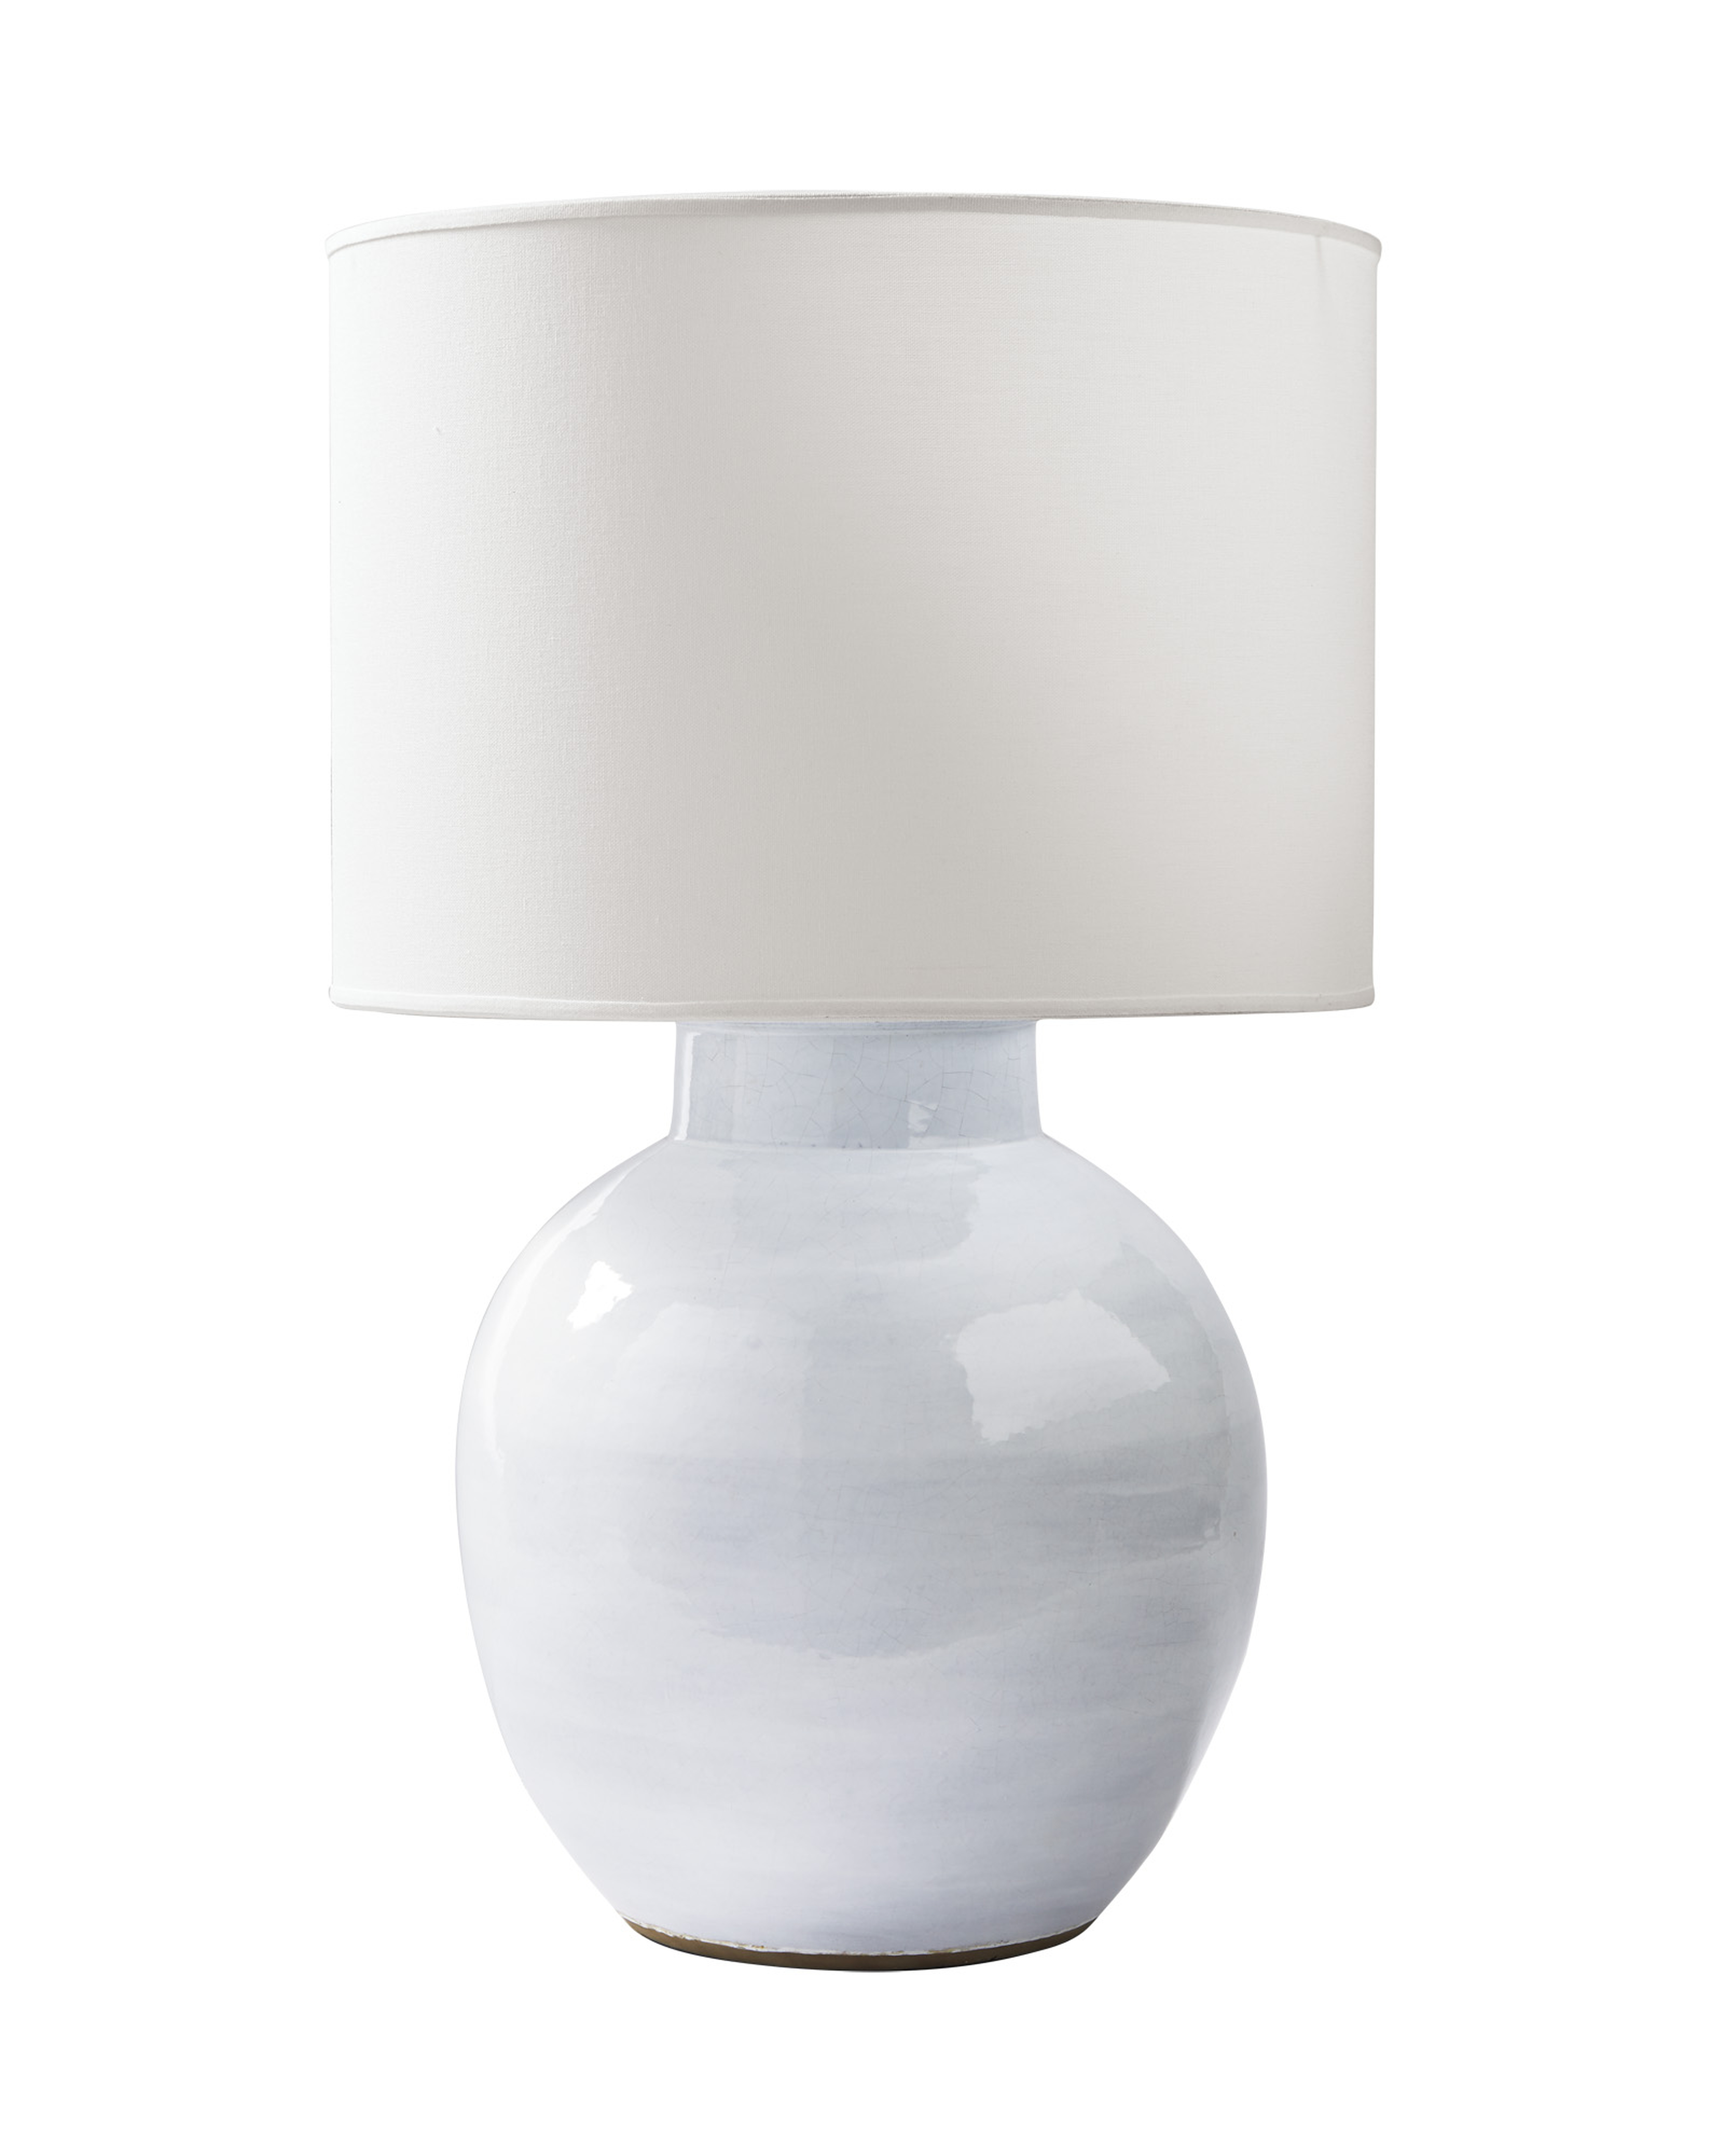 Morris Table Lamp - White - Serena and Lily